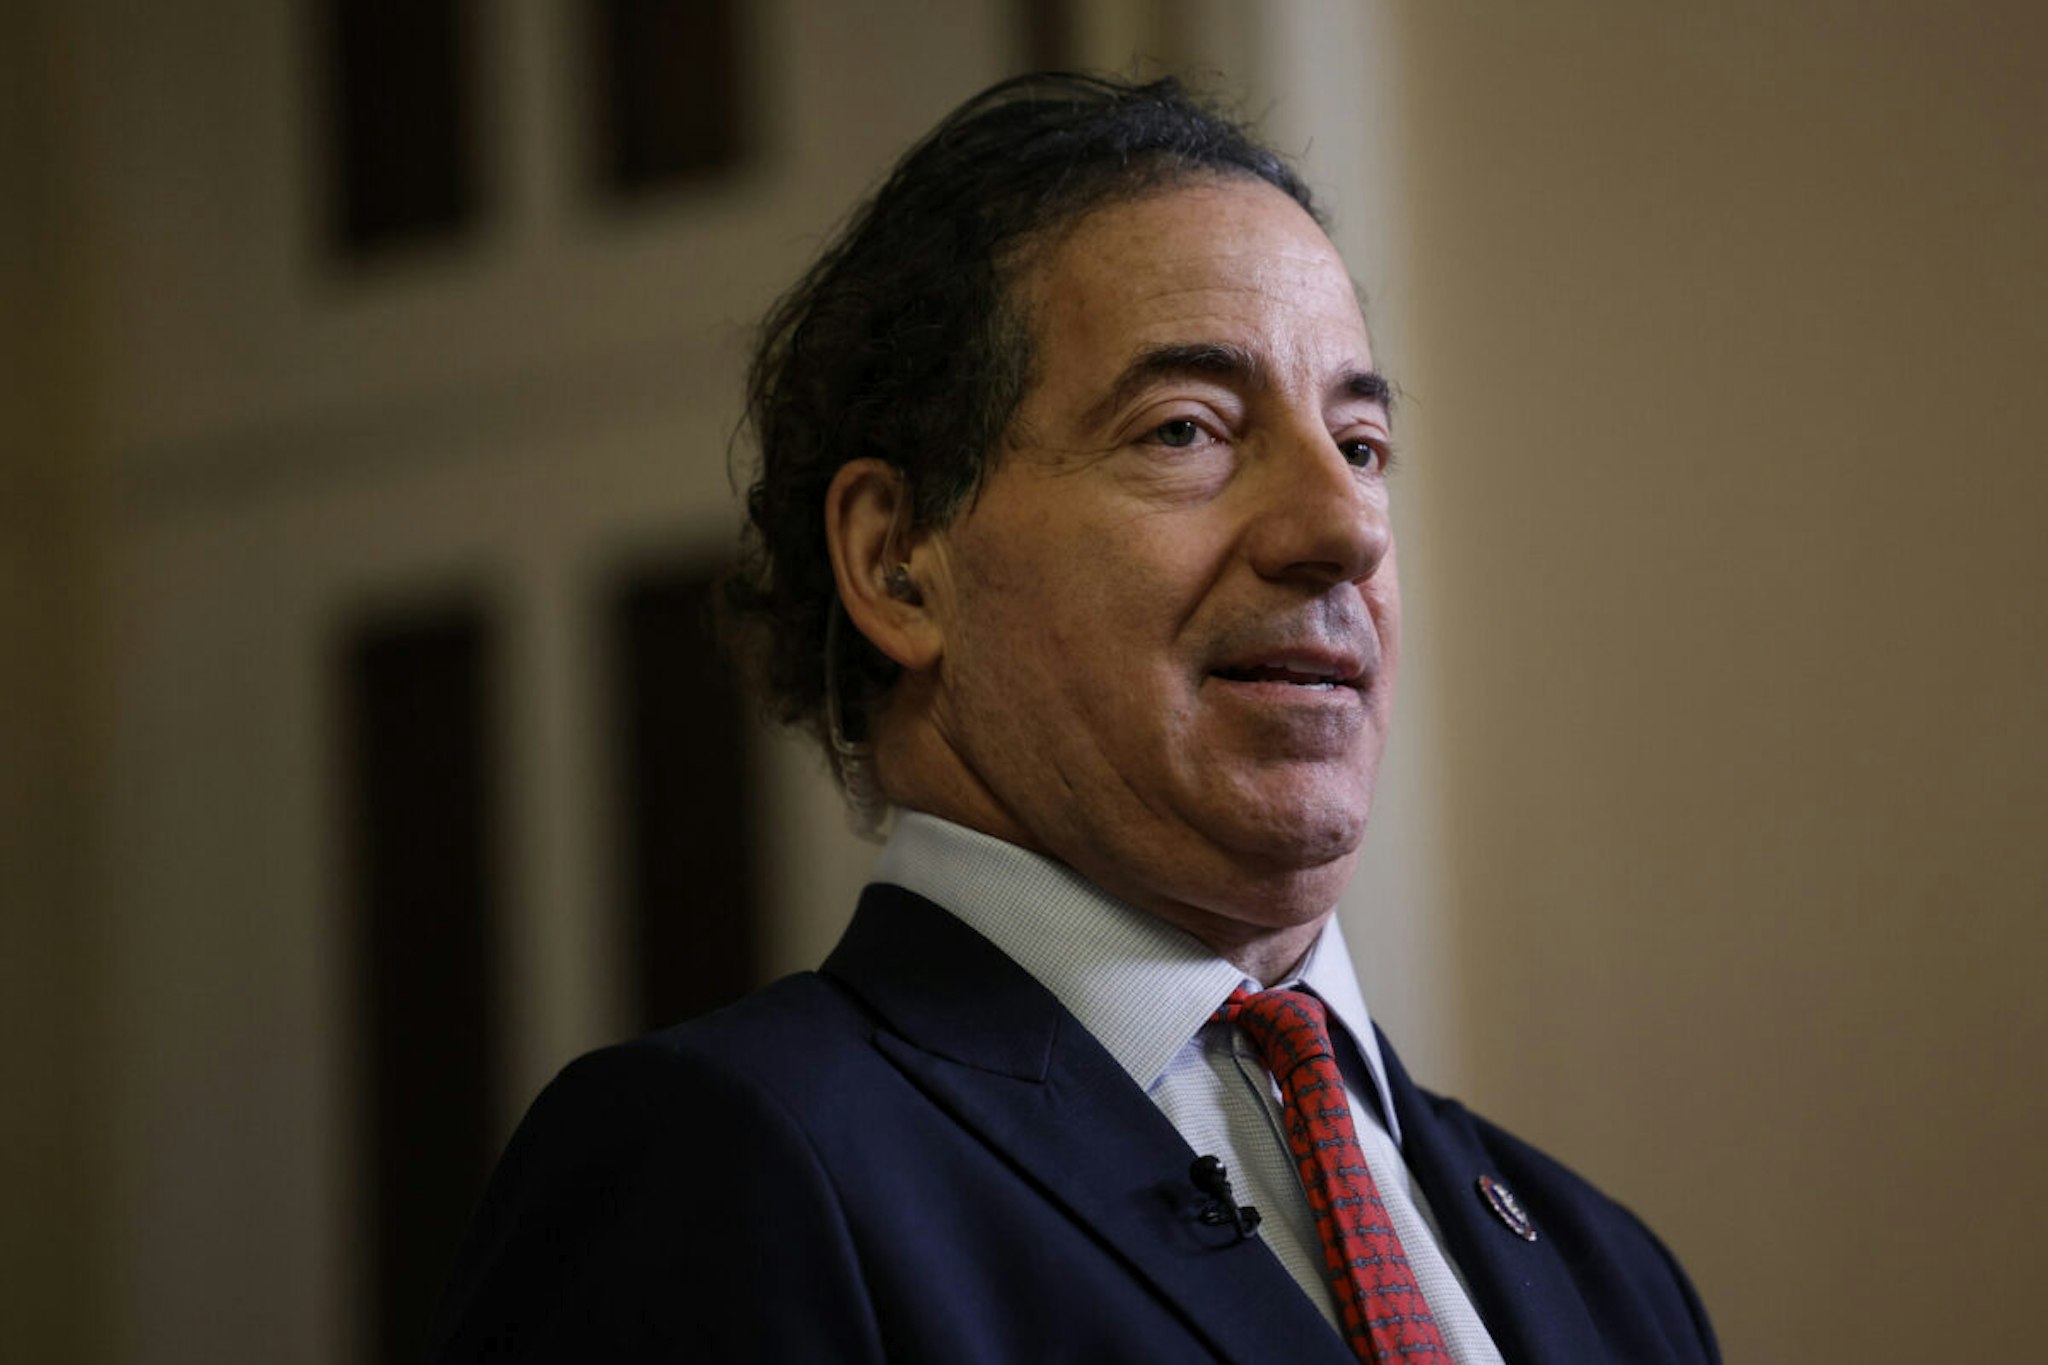 Rep. Jamie Raskin (D-MD) is interviewed on camera outside the House Chambers of the U.S. Capitol Building on December 23, 2022 in Washington, DC.